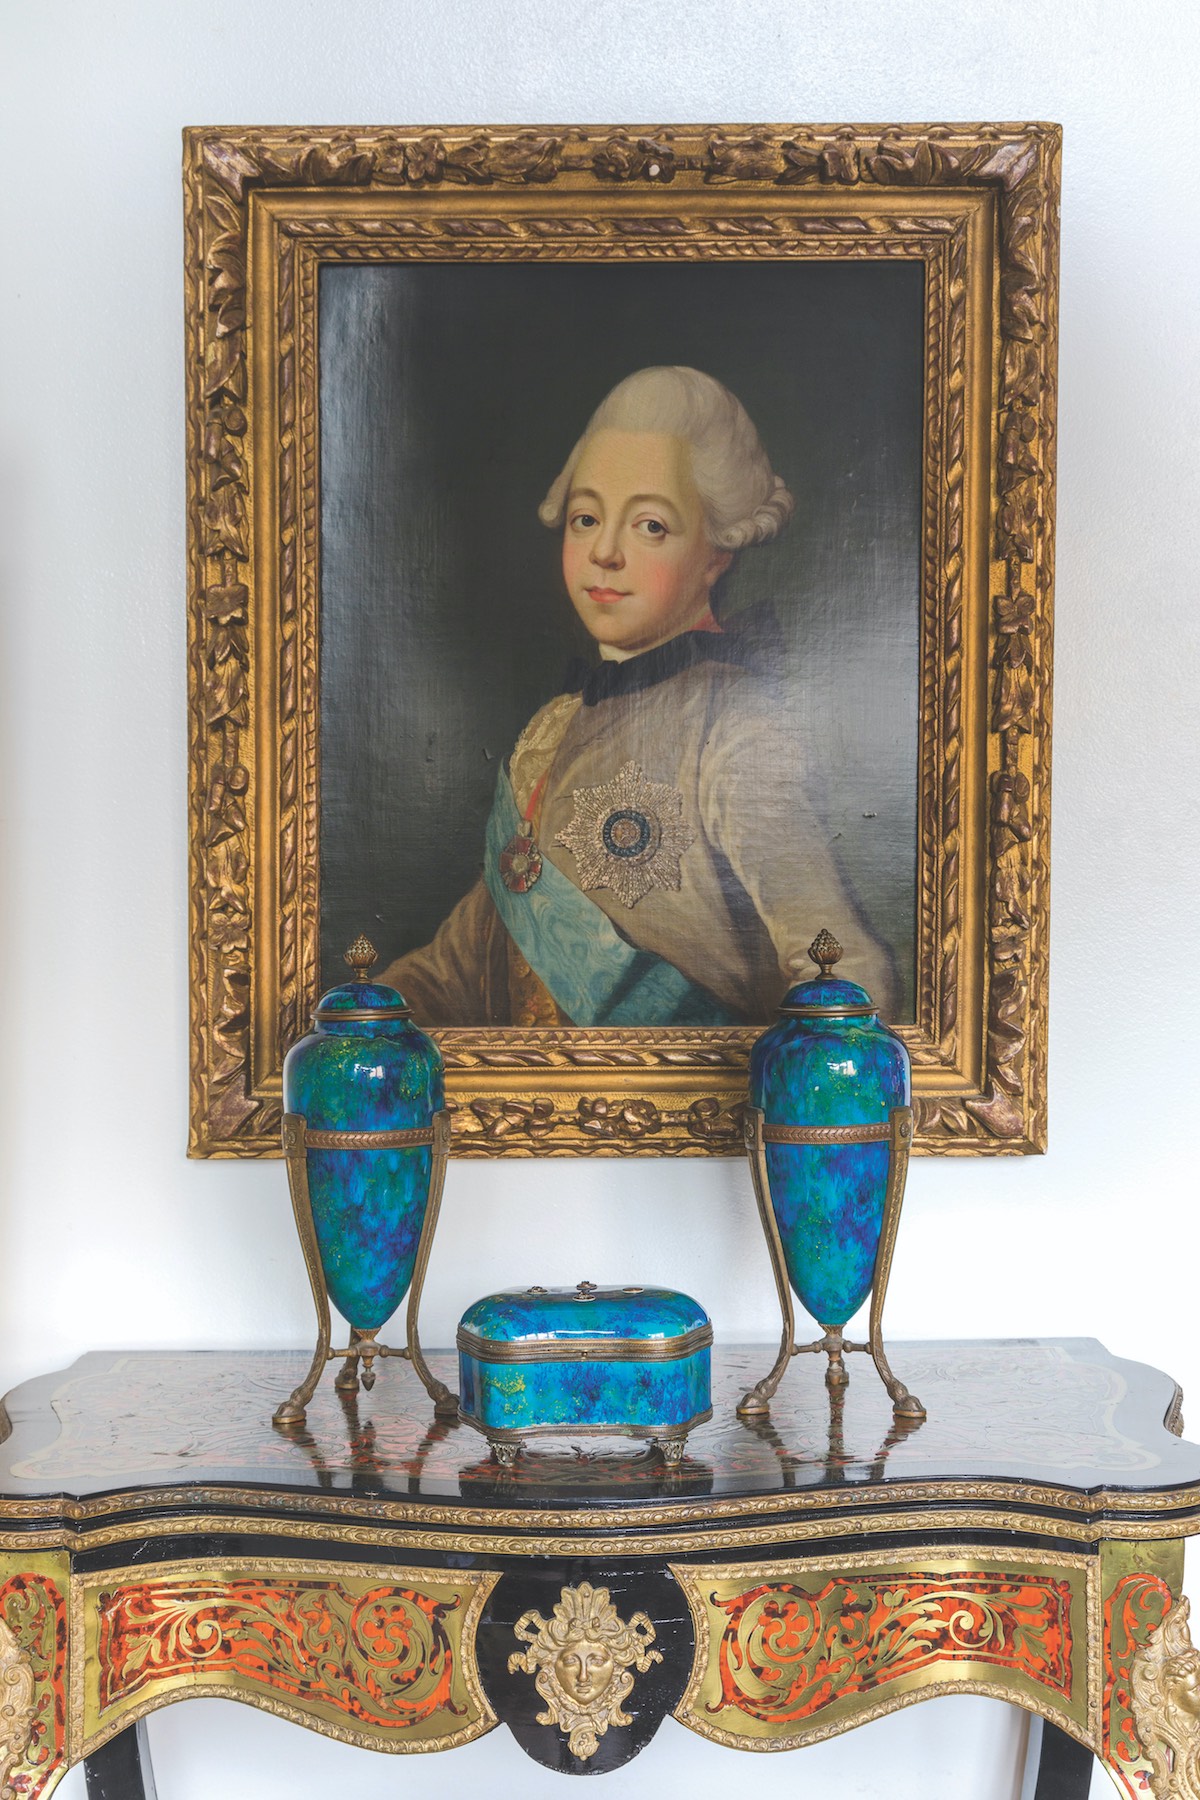 Portrait by Paul Milet over table with cobalt box and jars